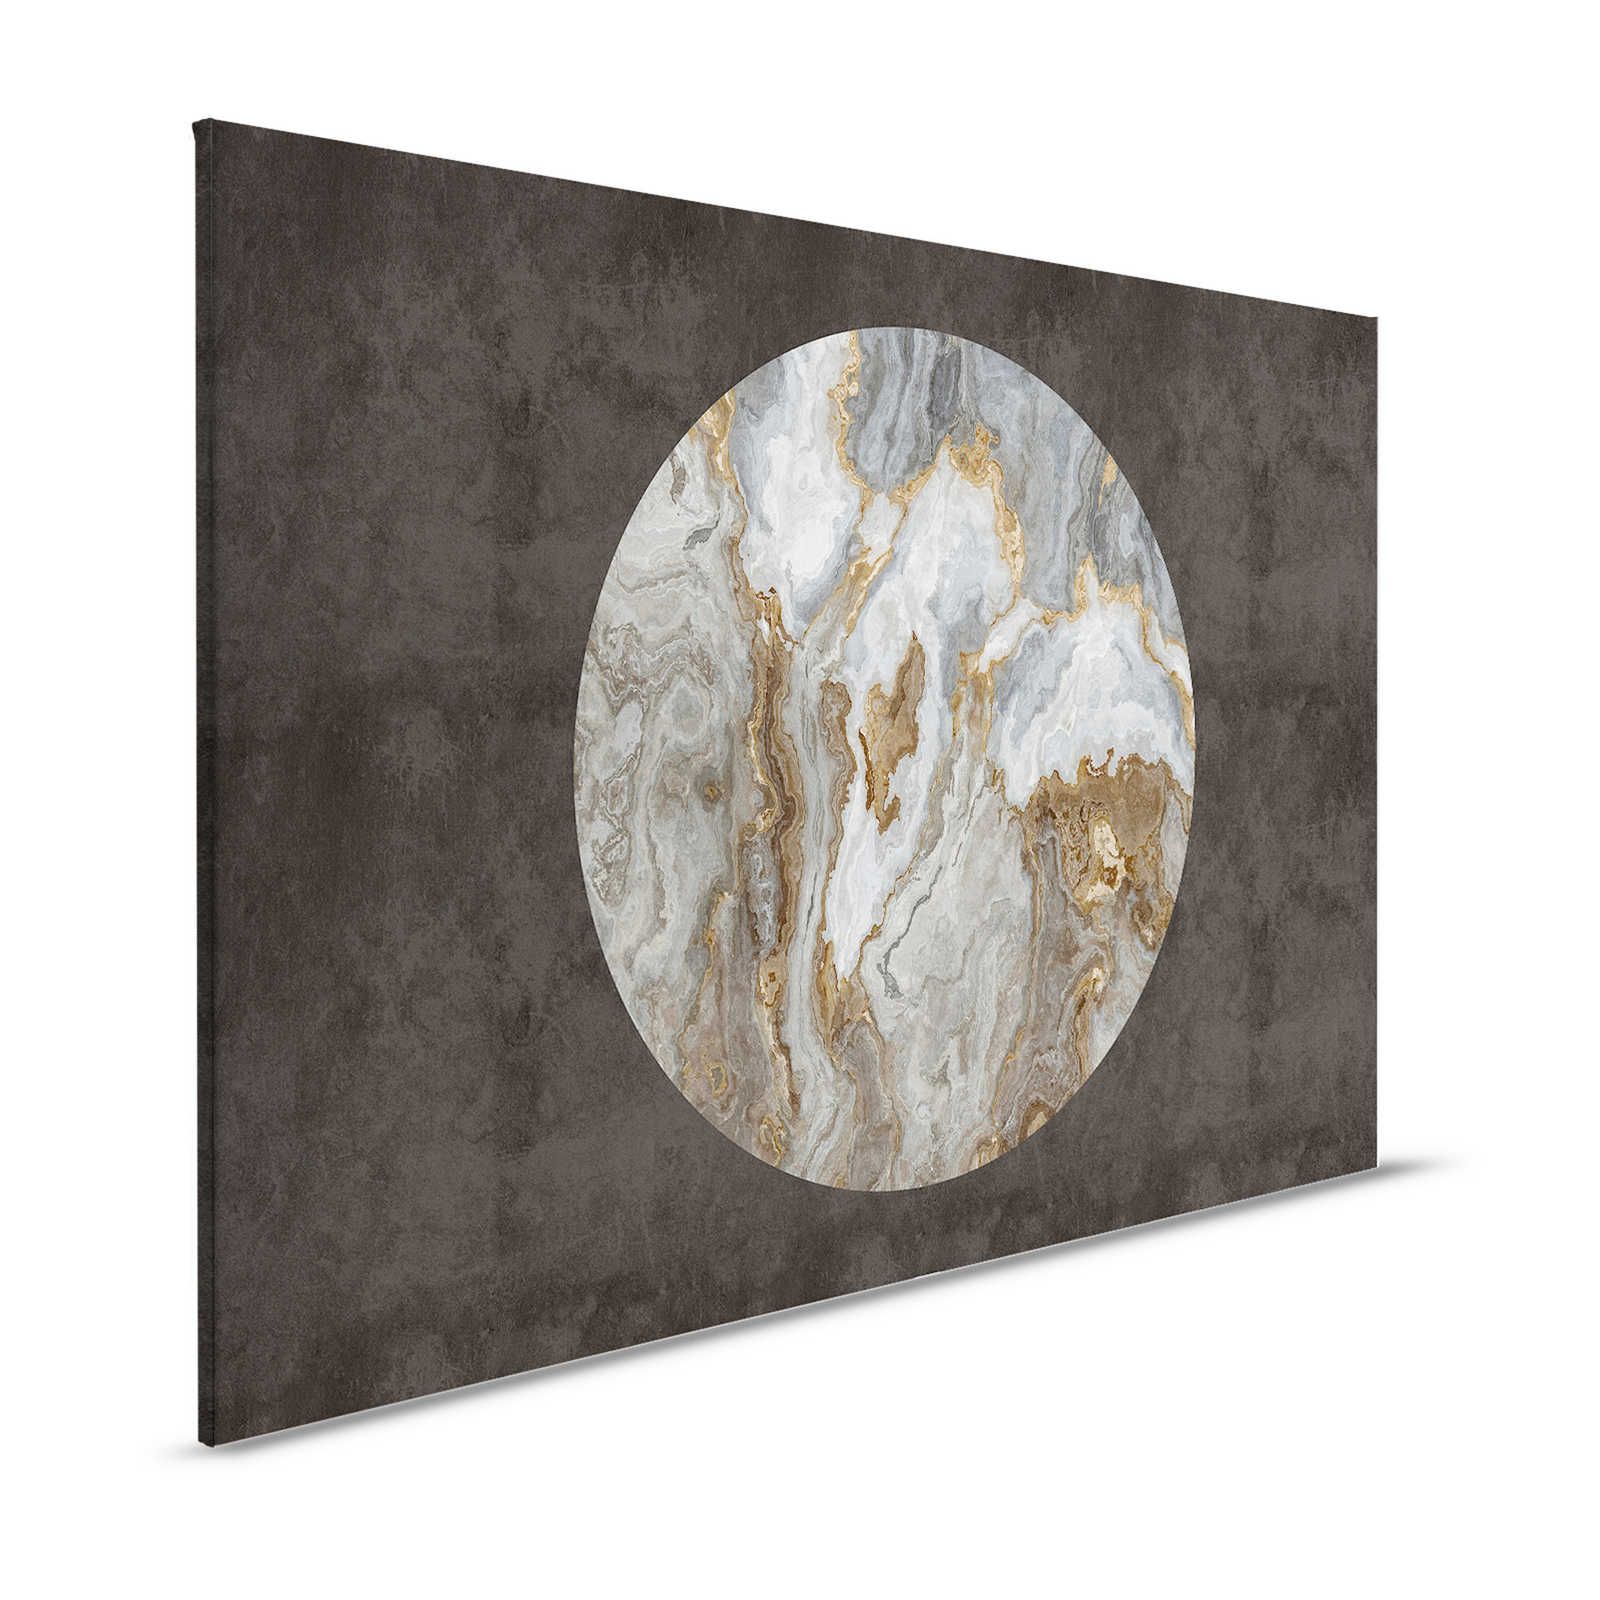 Luna 2 - Marble canvas picture Stone circle in front of black plaster look - 1,20 m x 0,80 m
